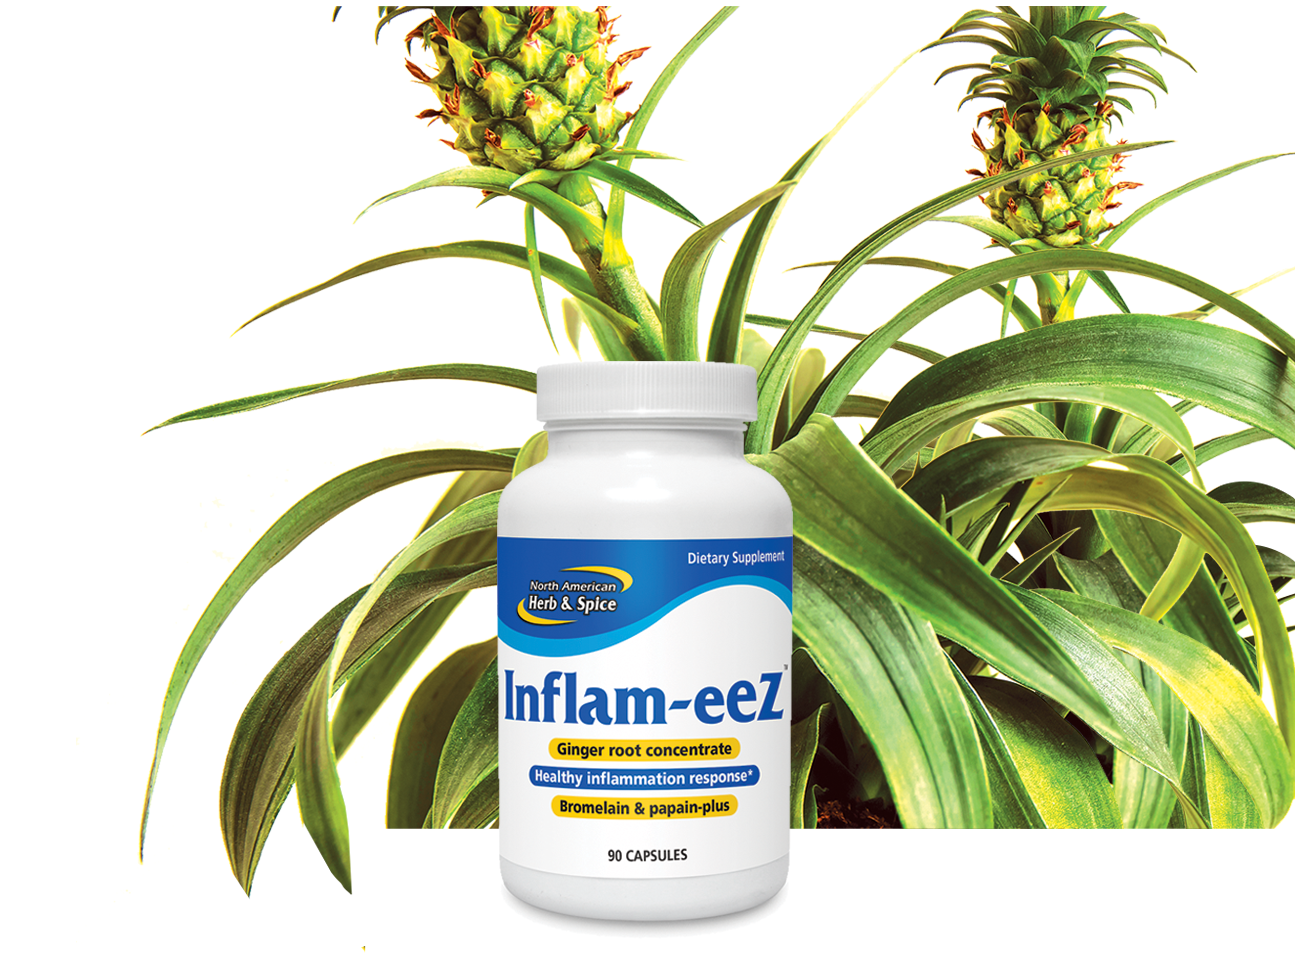 Bromelain ingredient with Inflam-eez product